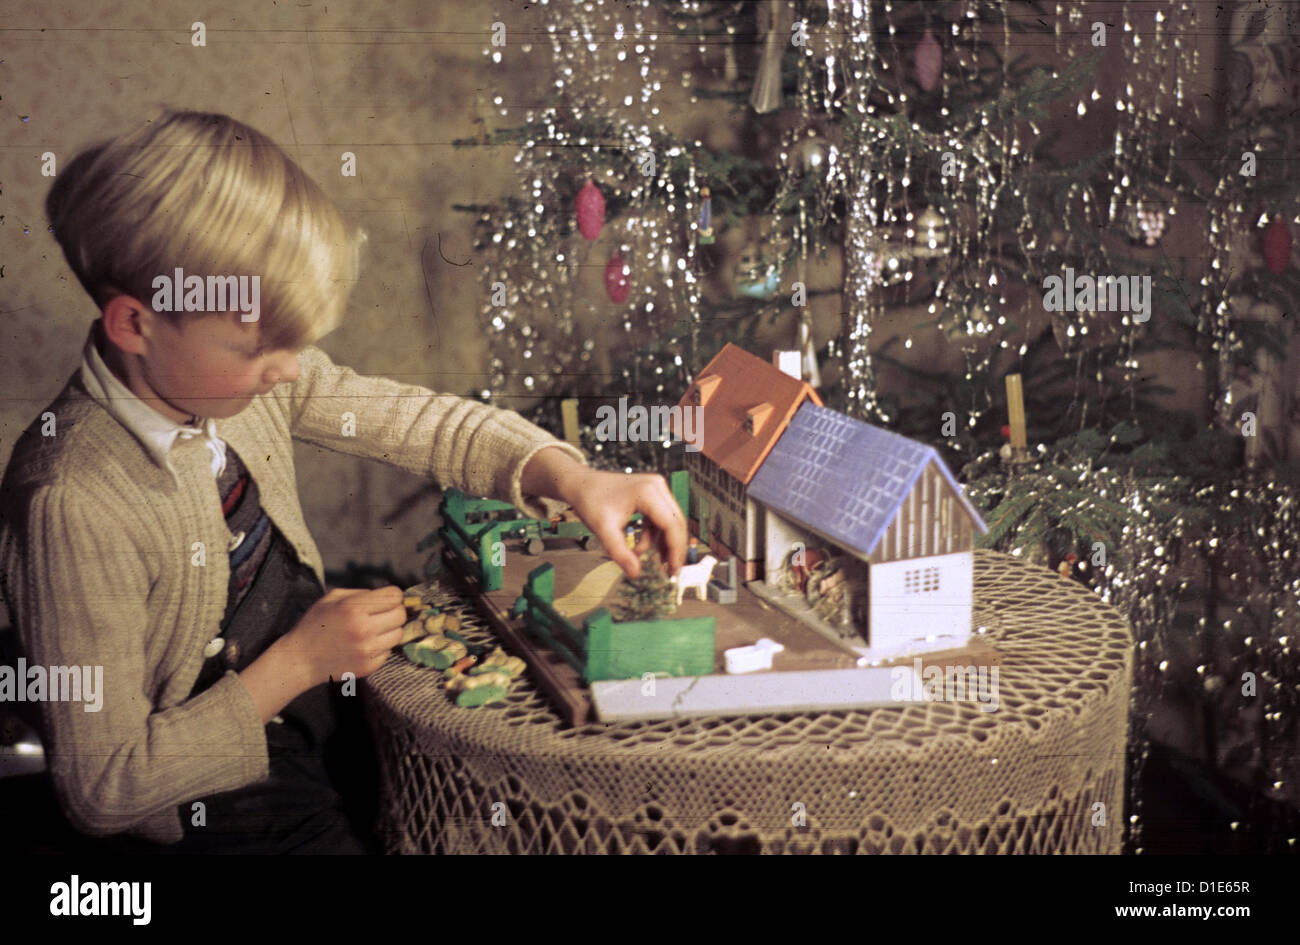 Christmas in the post-war period - a boy plays with his Christmas gift, a toy farm, on Christmas Eve 1947. Photo: ddrbildarchiv.de/Bonitz Stock Photo